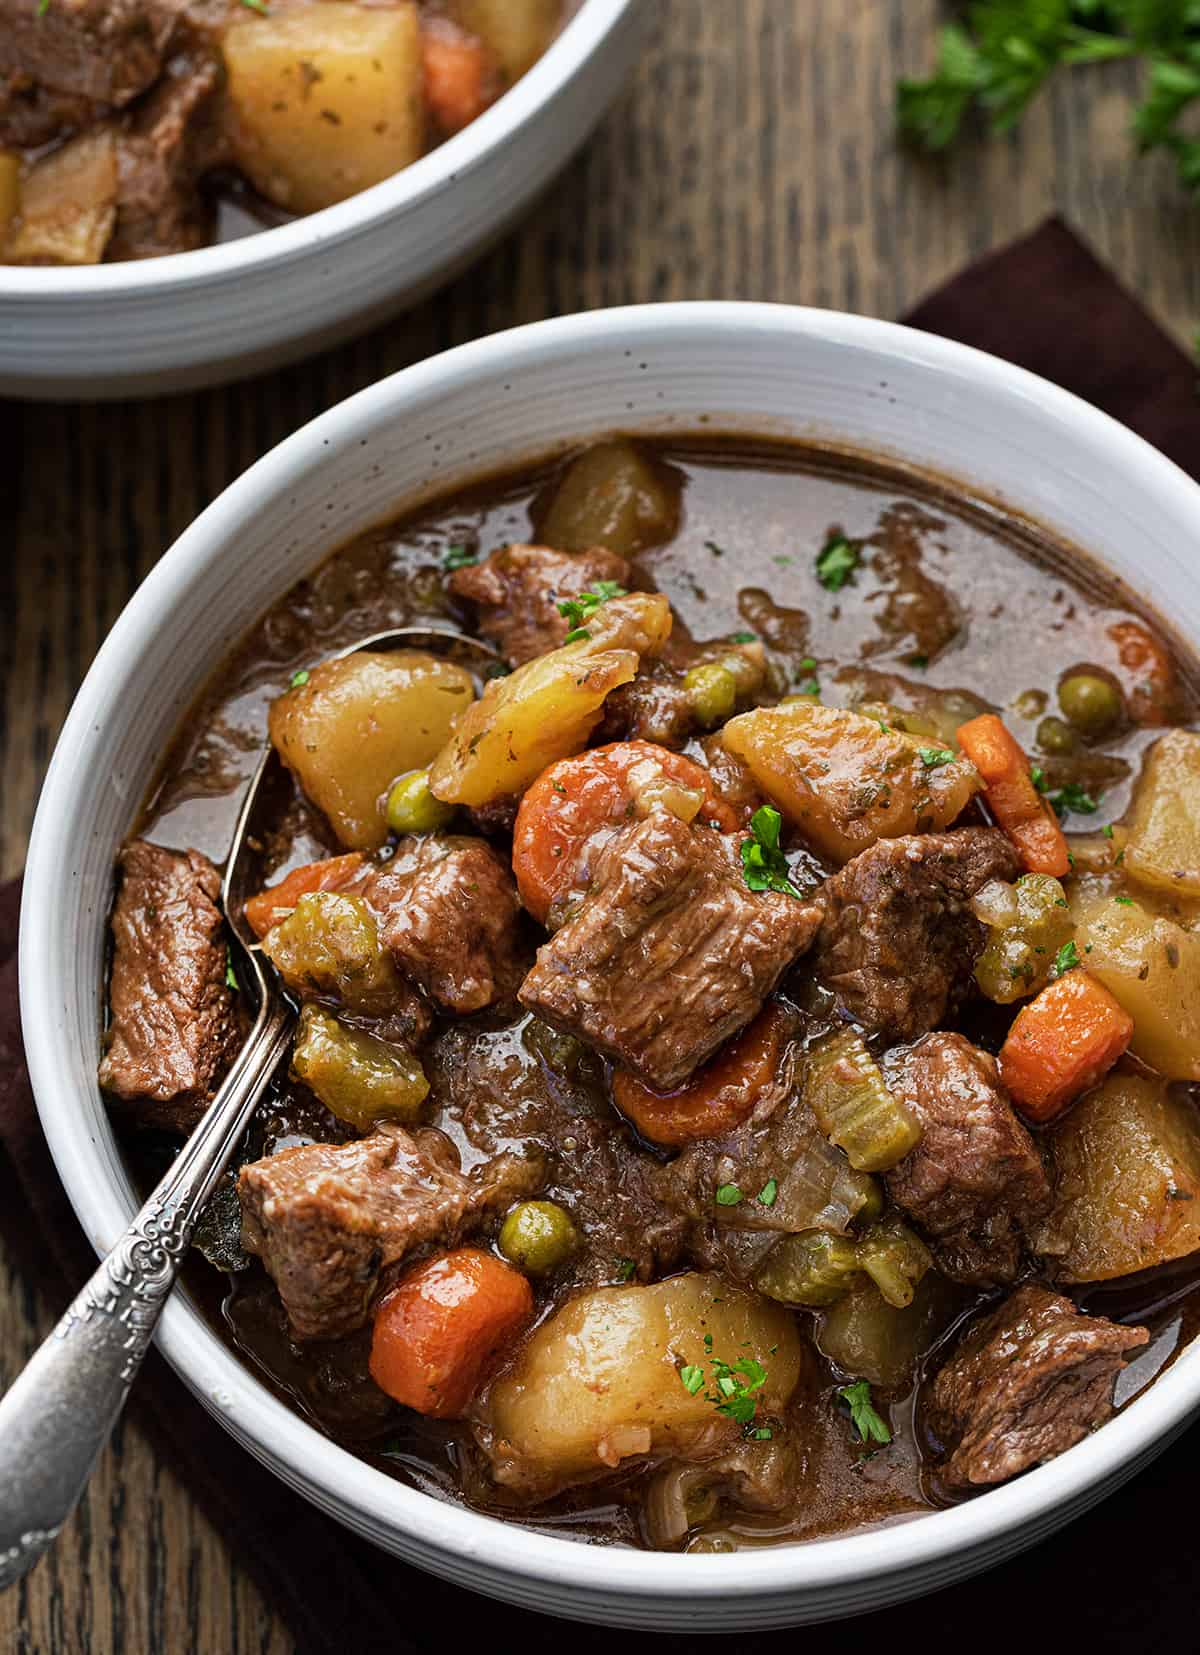 Close up of beef stew in a bowl showing the meat and potatoes and vegetables.